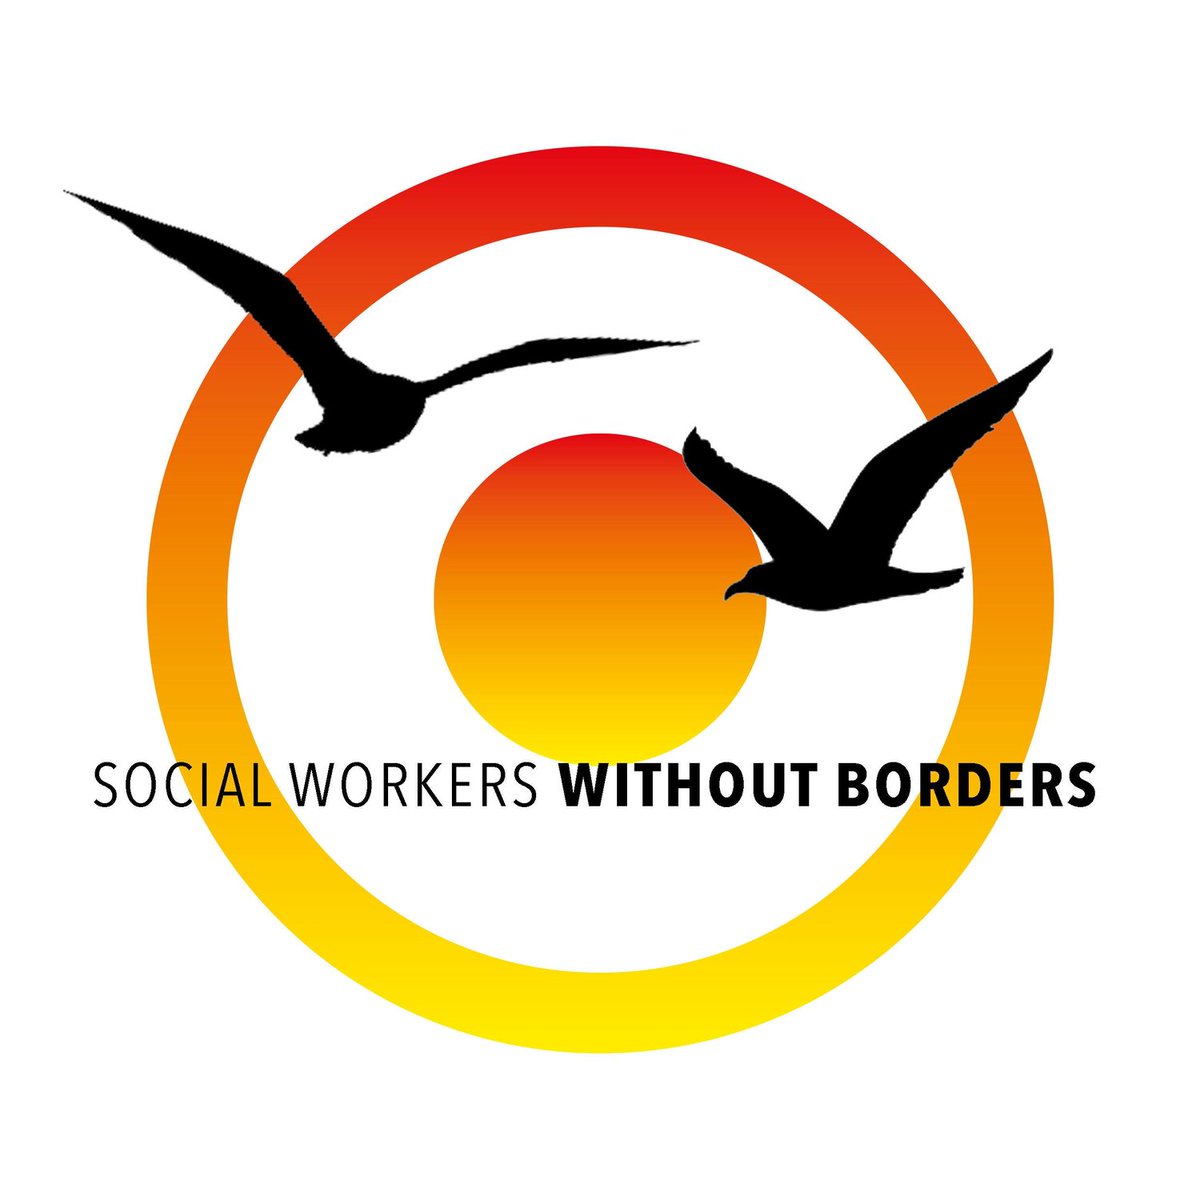 All royalties will be shared between charities @SocialWorkersWB and @TwMCuk in gratitude for their unstinting dedication to supporting people in the most difficult and vulnerable situations, and working to end the hostile environment for migrant children, families and adults.